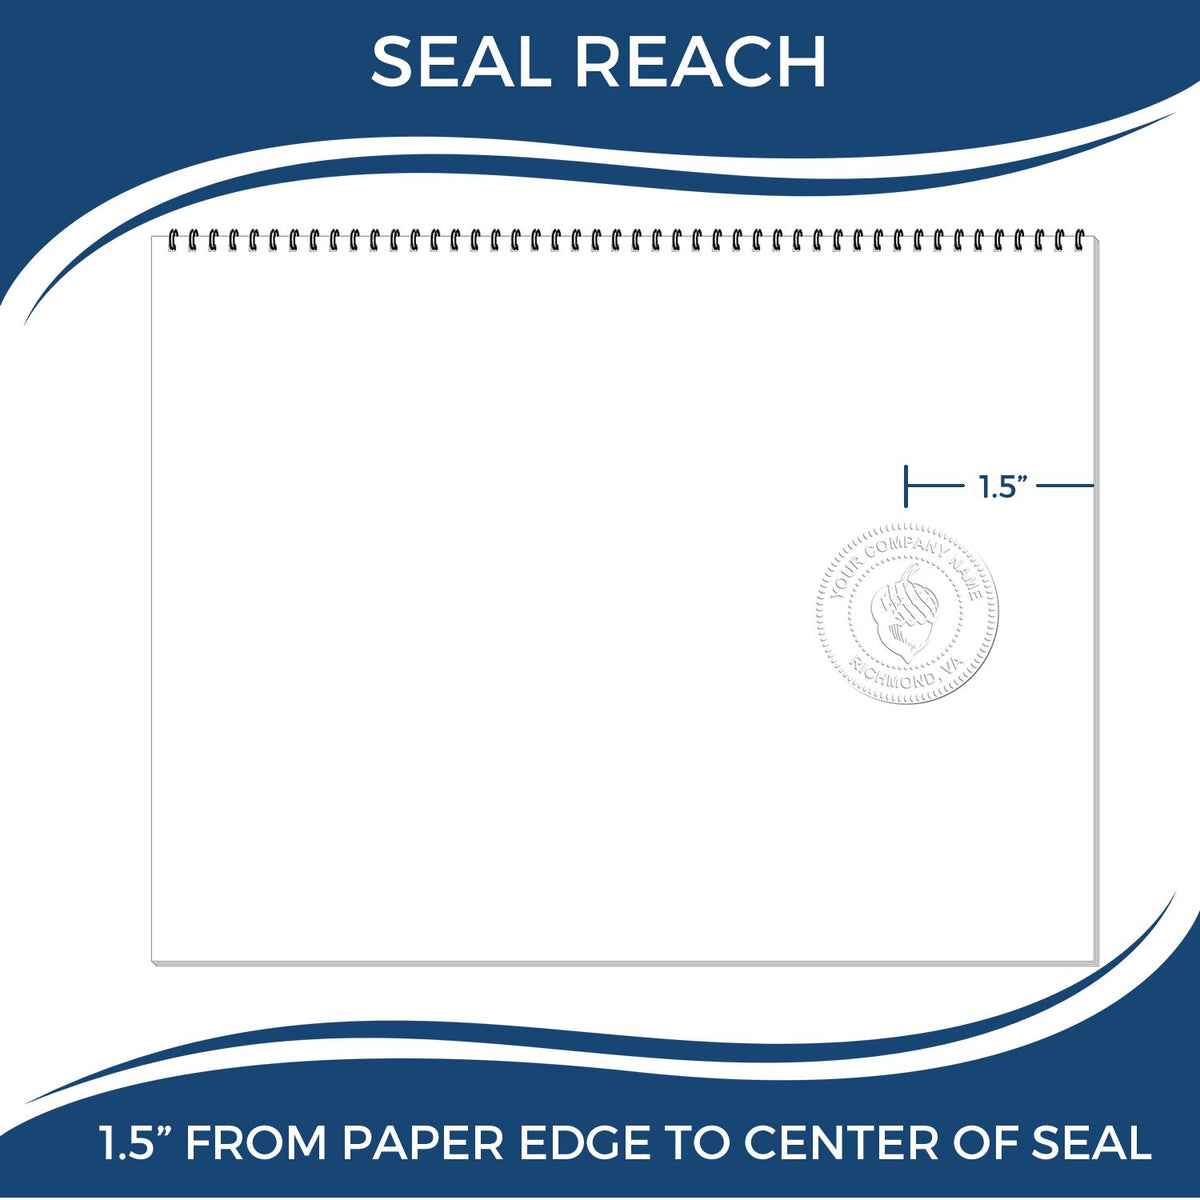 An infographic showing the seal reach which is represented by a ruler and a miniature seal image of the Handheld Guam Professional Geologist Embosser